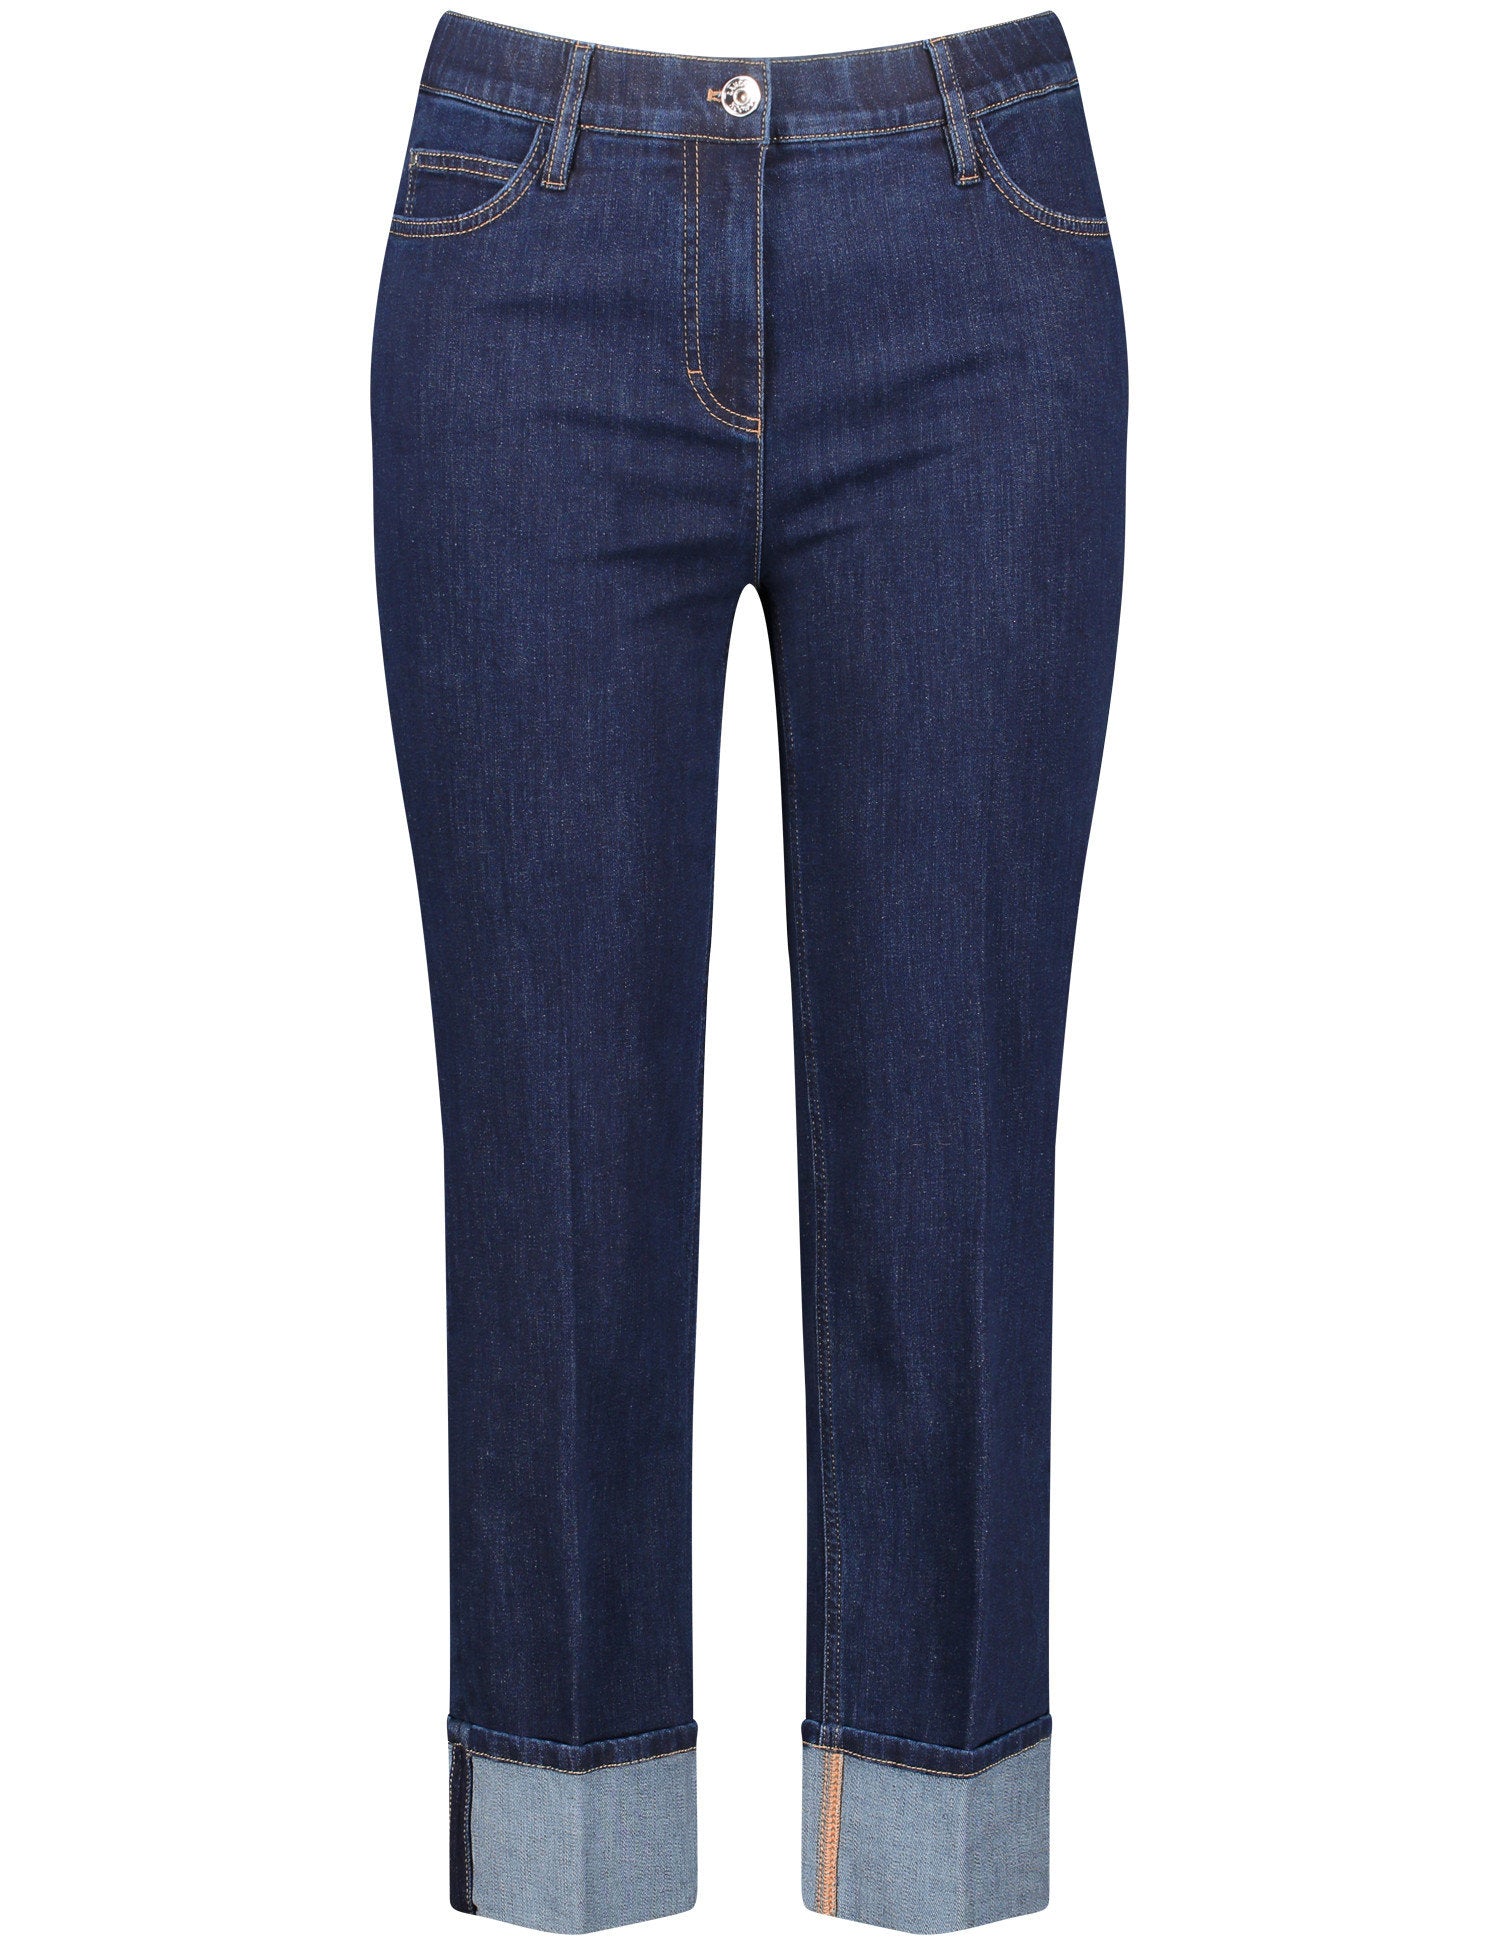 7-8-Length Jeans With Turn-Ups_320228-21431_8999_02